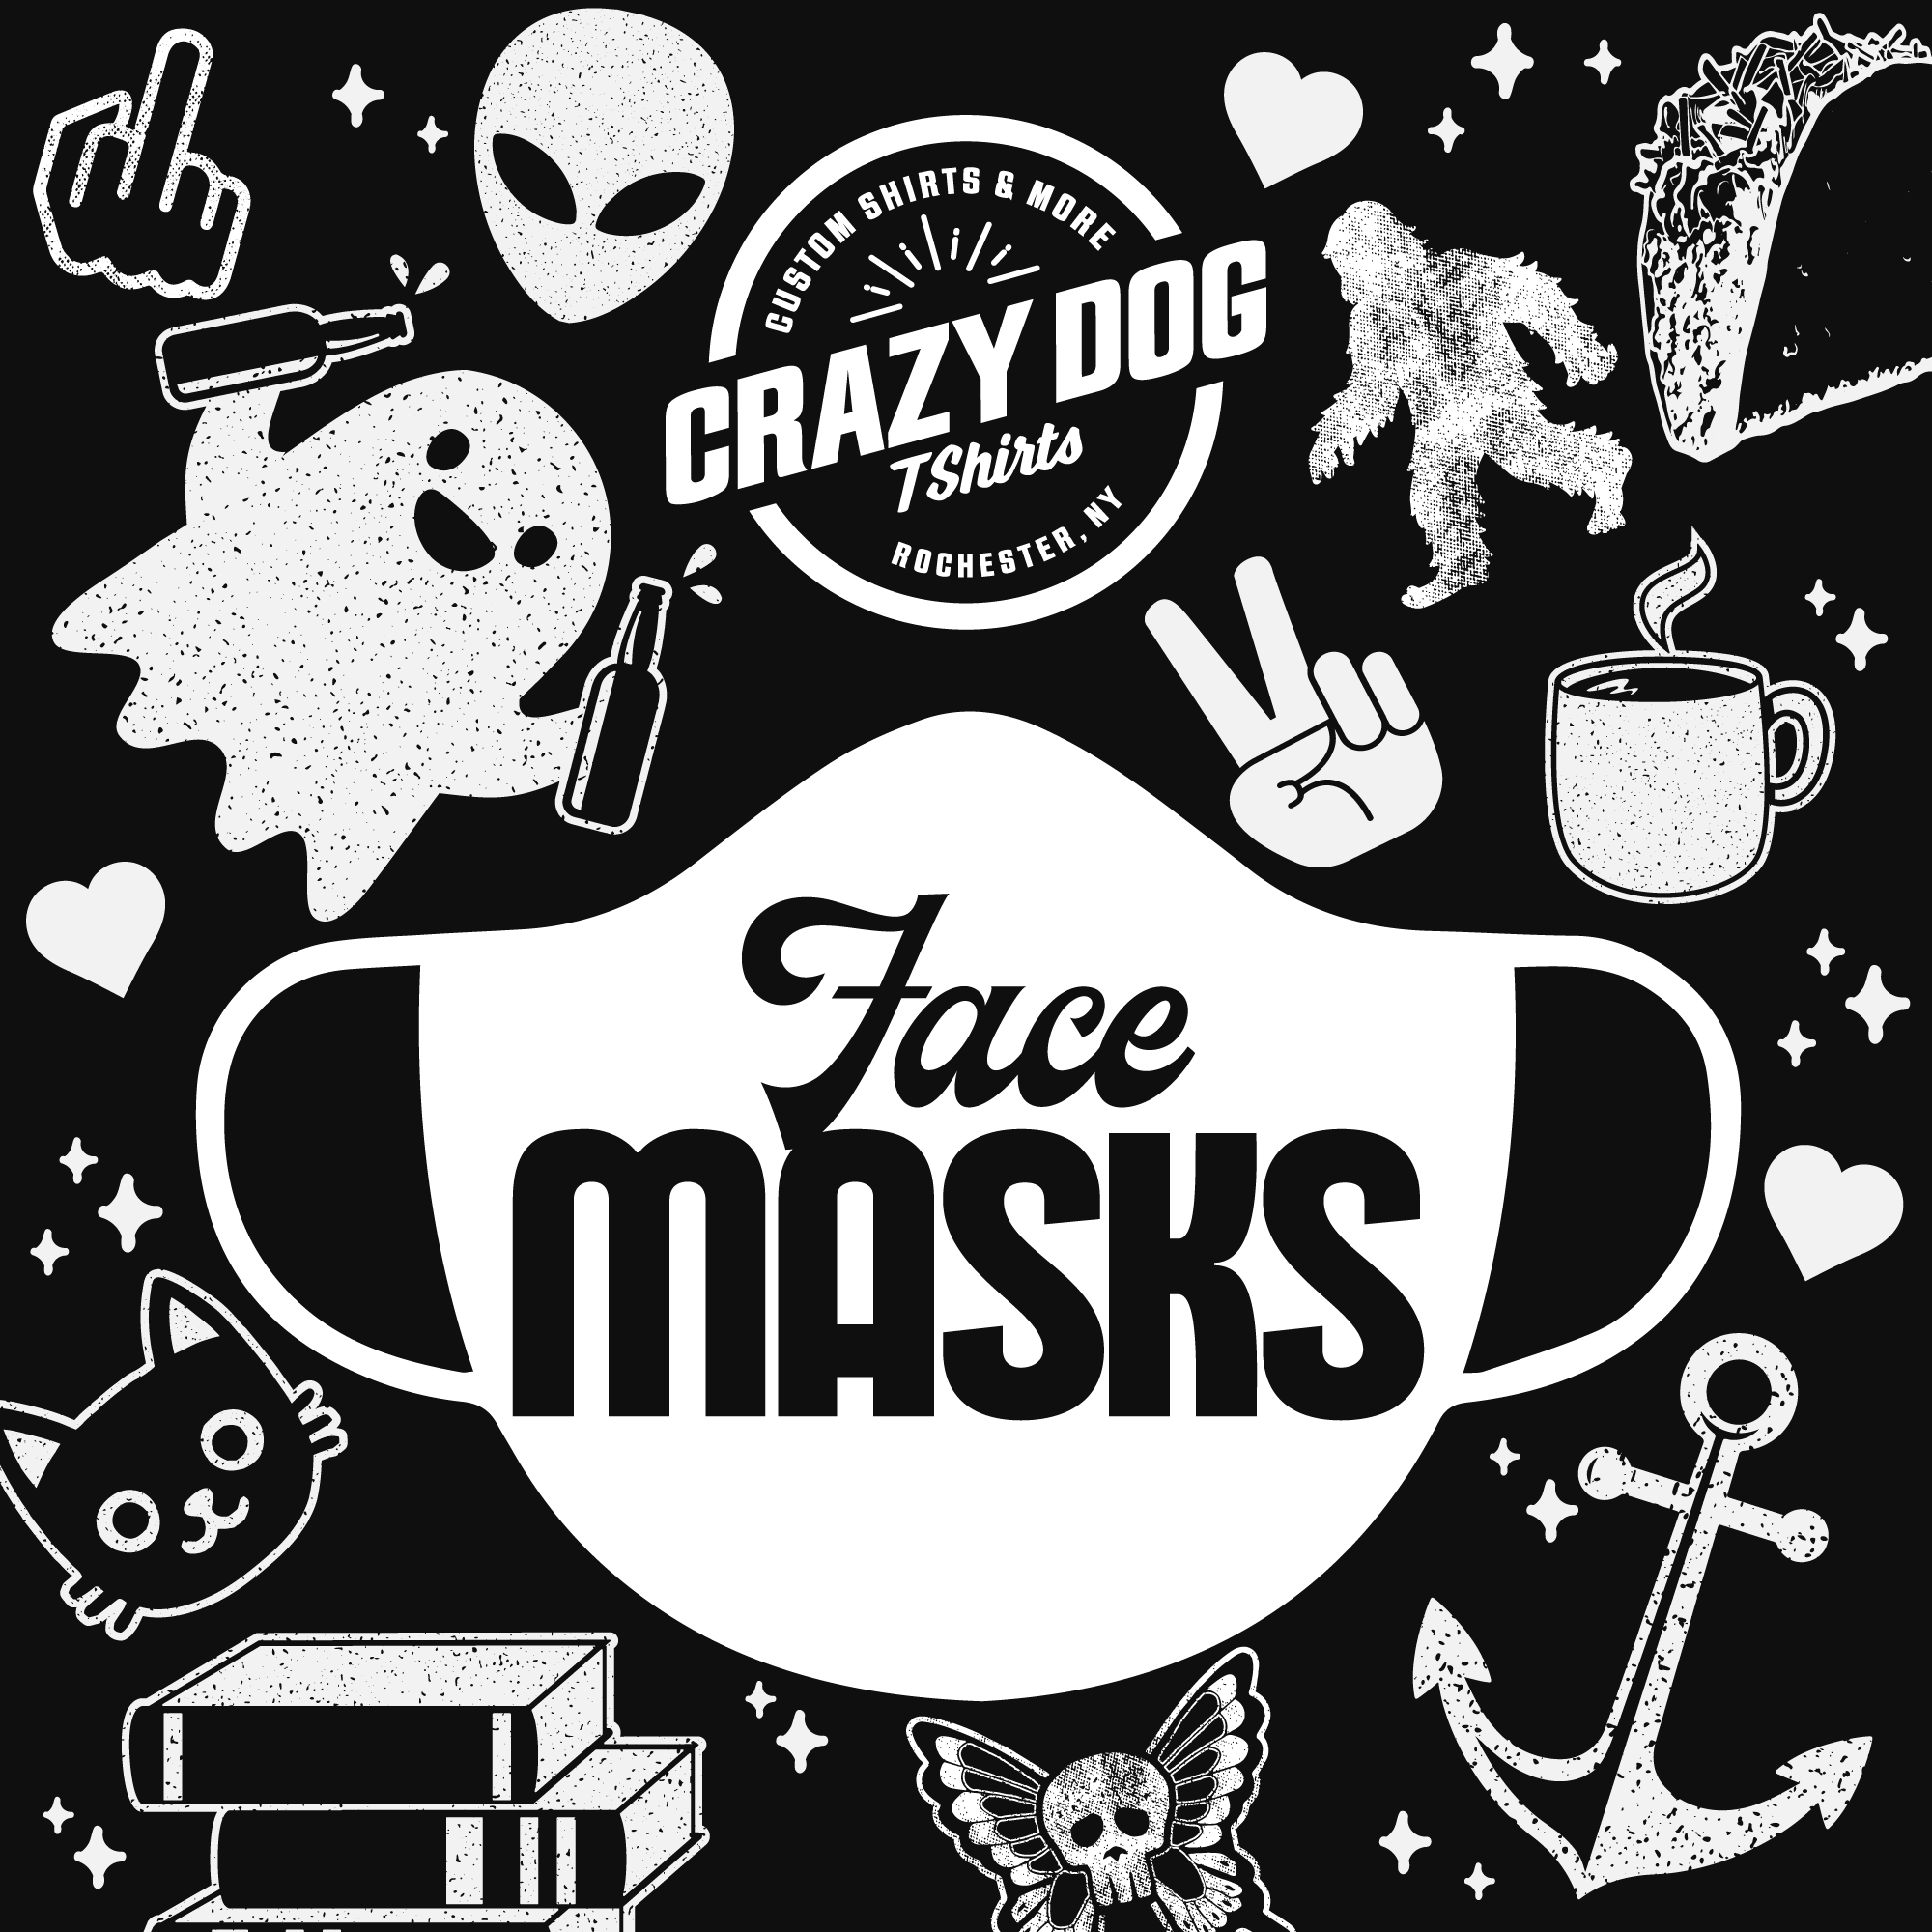 Skeleton Zipper Face Mask Funny Halloween Skull Graphic Novelty Nose And Mouth Covering - image 4 of 6